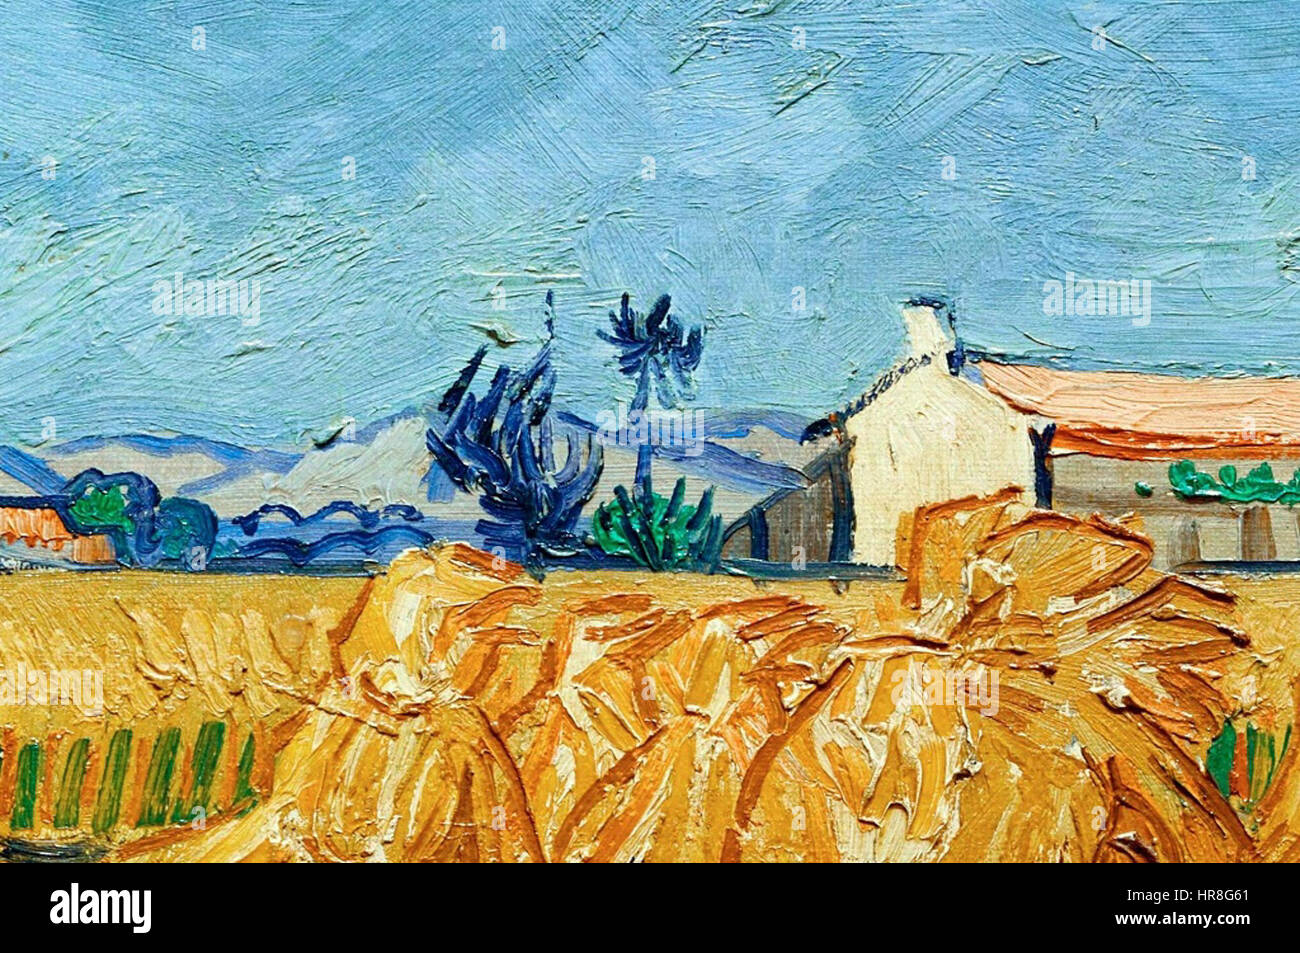 Vincent-van-Gogh Detail-of Harvest-at-Arles-in-the-Provence Arles-June-1888 Stock Photo